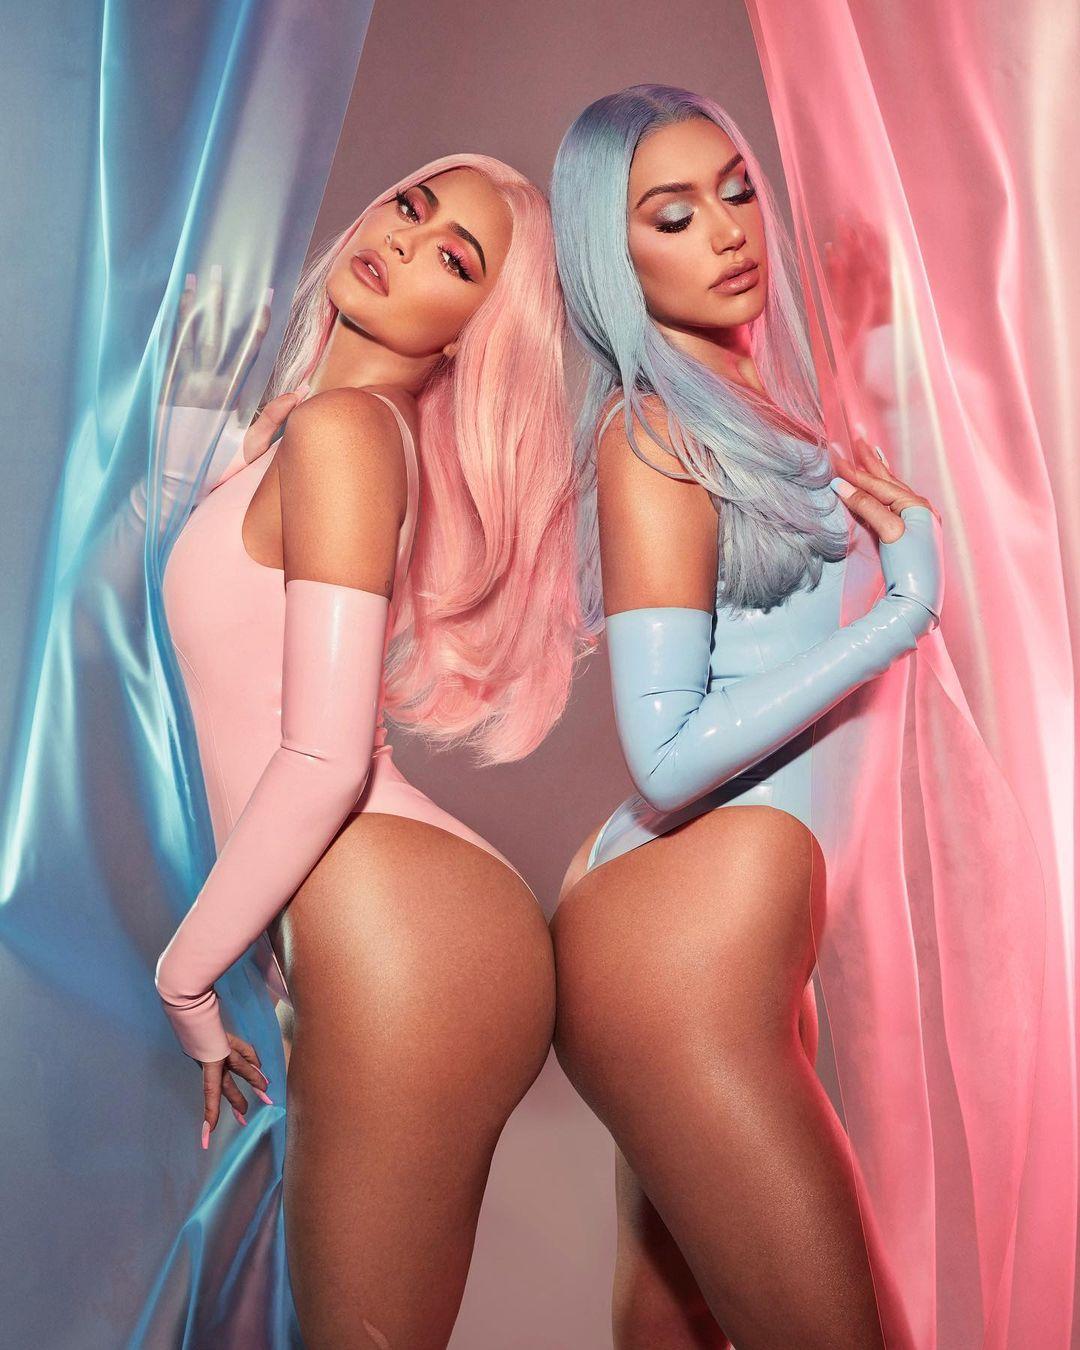 Kylie Jenner and Stassie Karanikolaou posing for the camera.